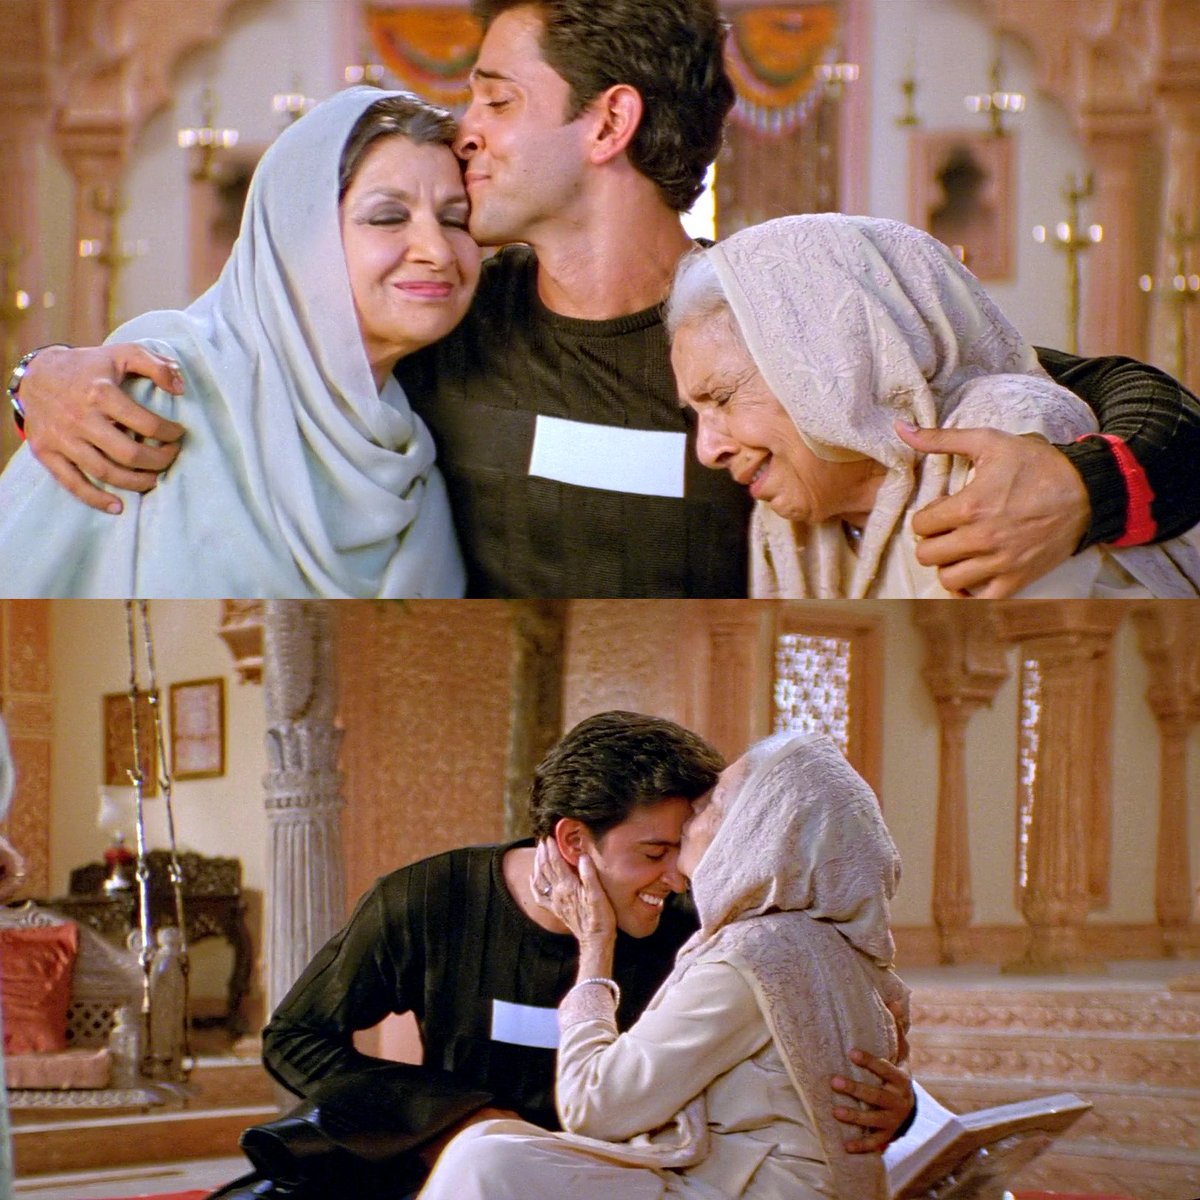 Call me old fashioned...
- but I think the kiss between parents/grandparents and their children/grandchildren is one of the most joyous ones. And even more so when the children are grown up.
#HappyKissDay with an edit with #HrithikRoshan #AchalaSachdev and #SushmaSeth in #KKKG